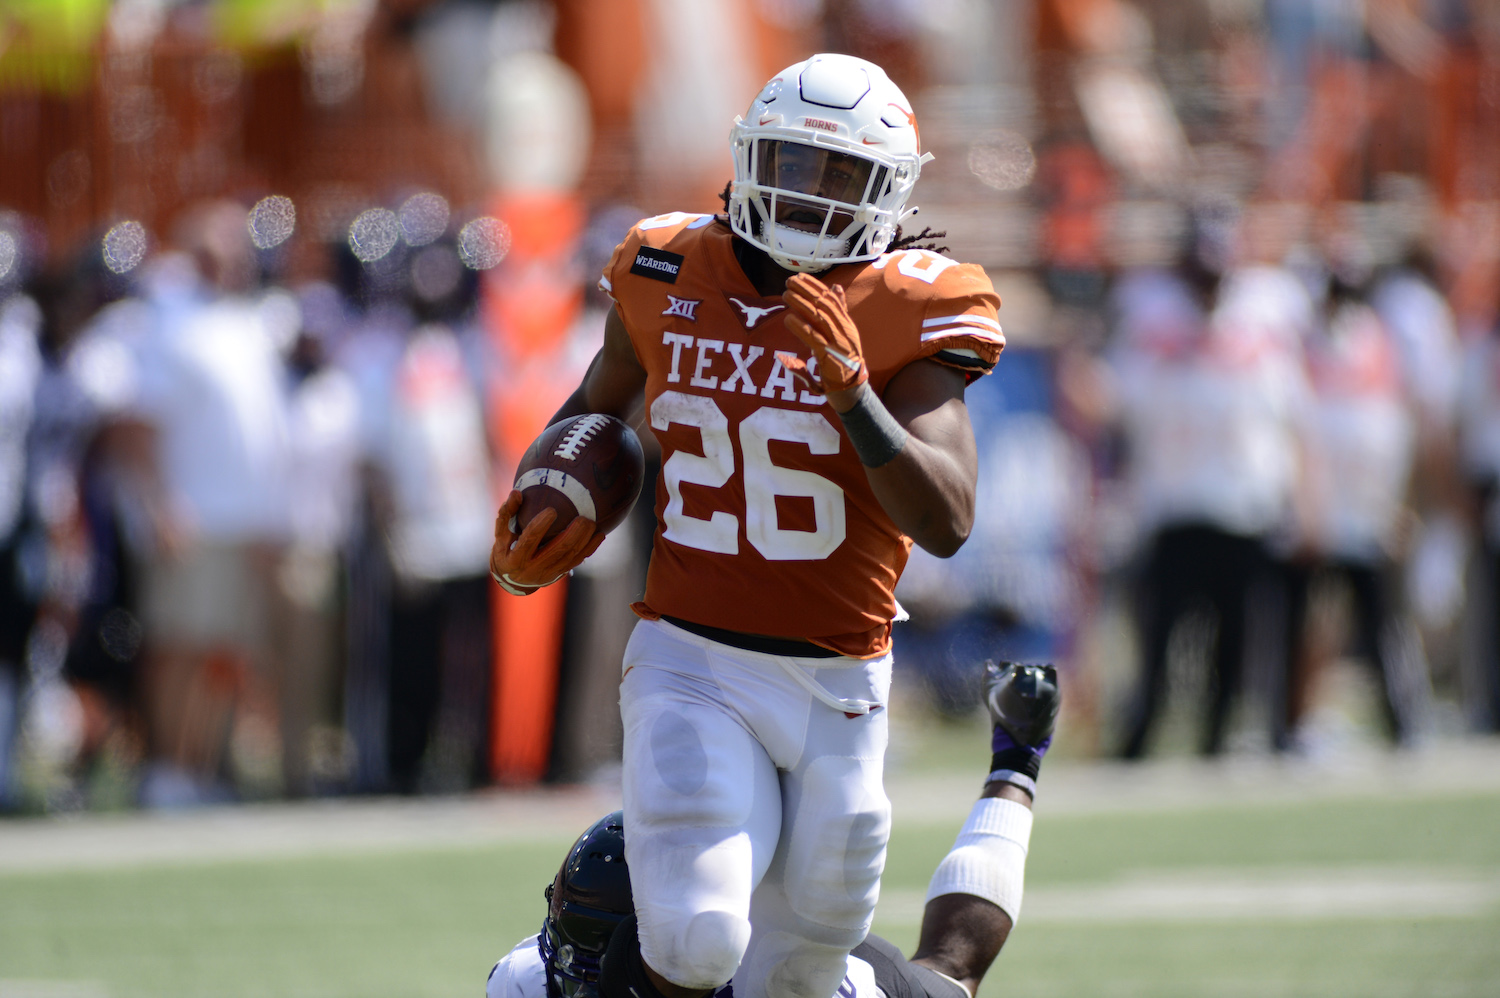 Texas Longhorns RB Keaontay Ingram doesn't want to play for Steve Sarkisian